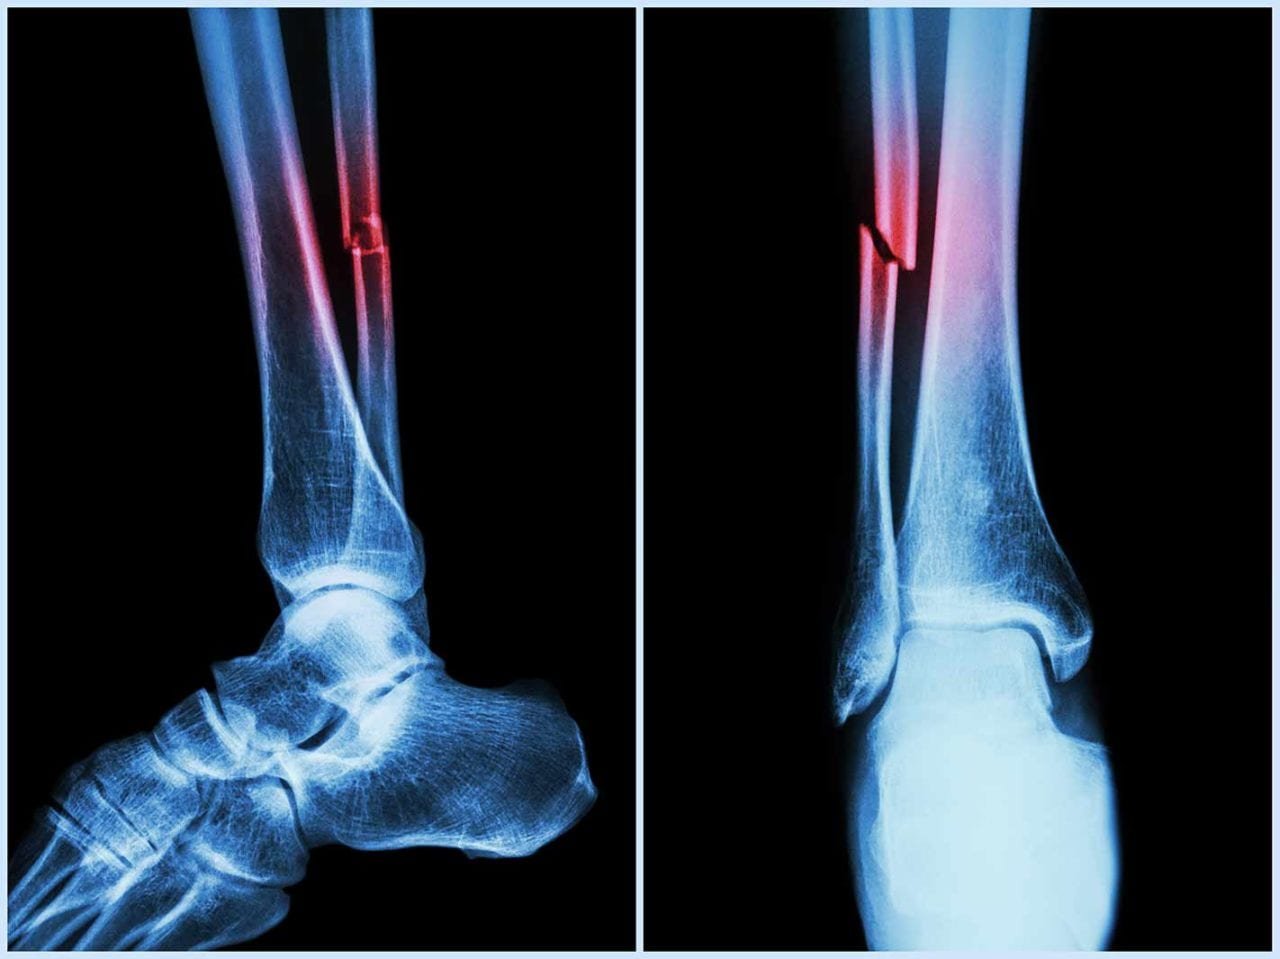 Covid Can Cause Bone Loss, Higher Fracture Risk